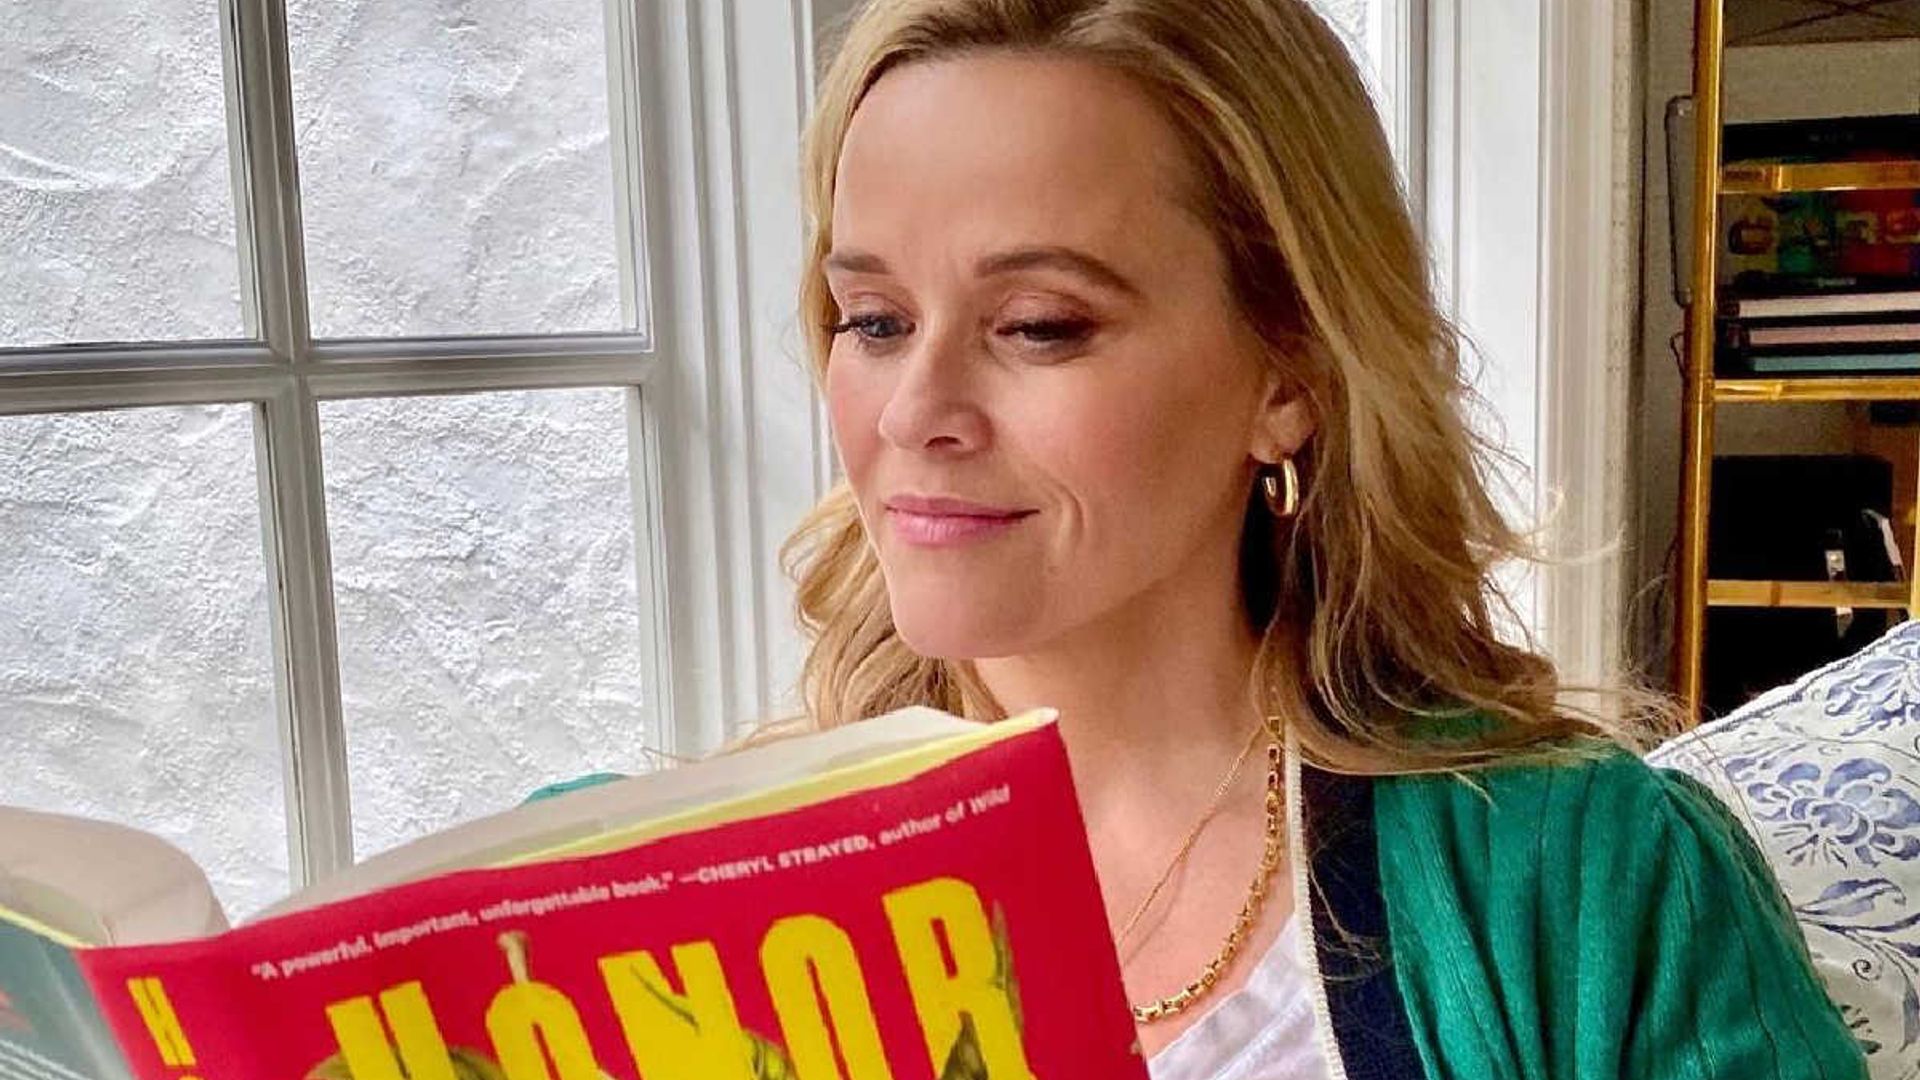 6 Reese Witherspoon Book Club reads for your 2022 reading list